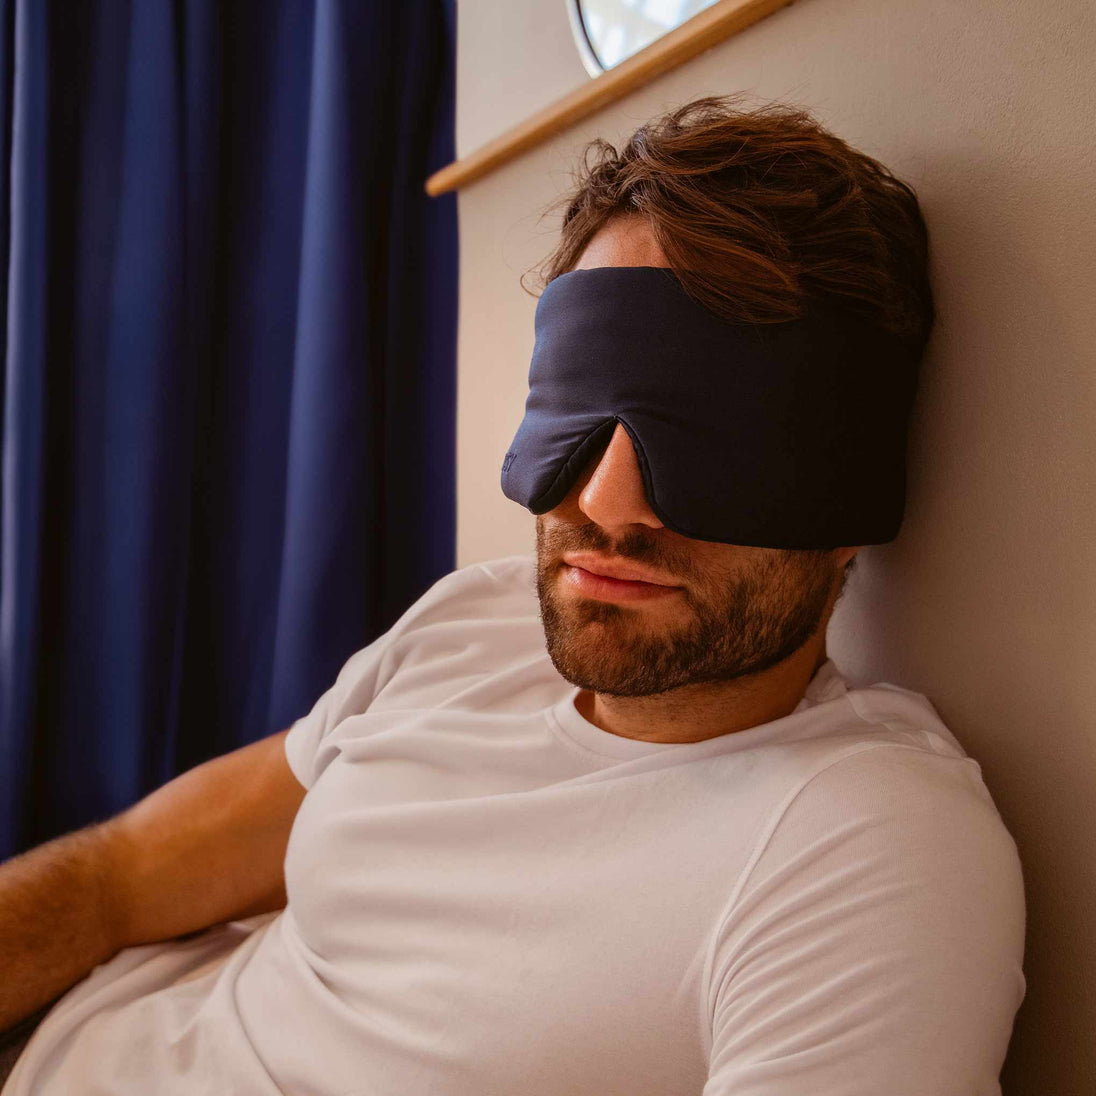 Man leanining against bedroom wall with blue silk curtain in the background and a blue Drowsy silk sleep mask covering his eyes